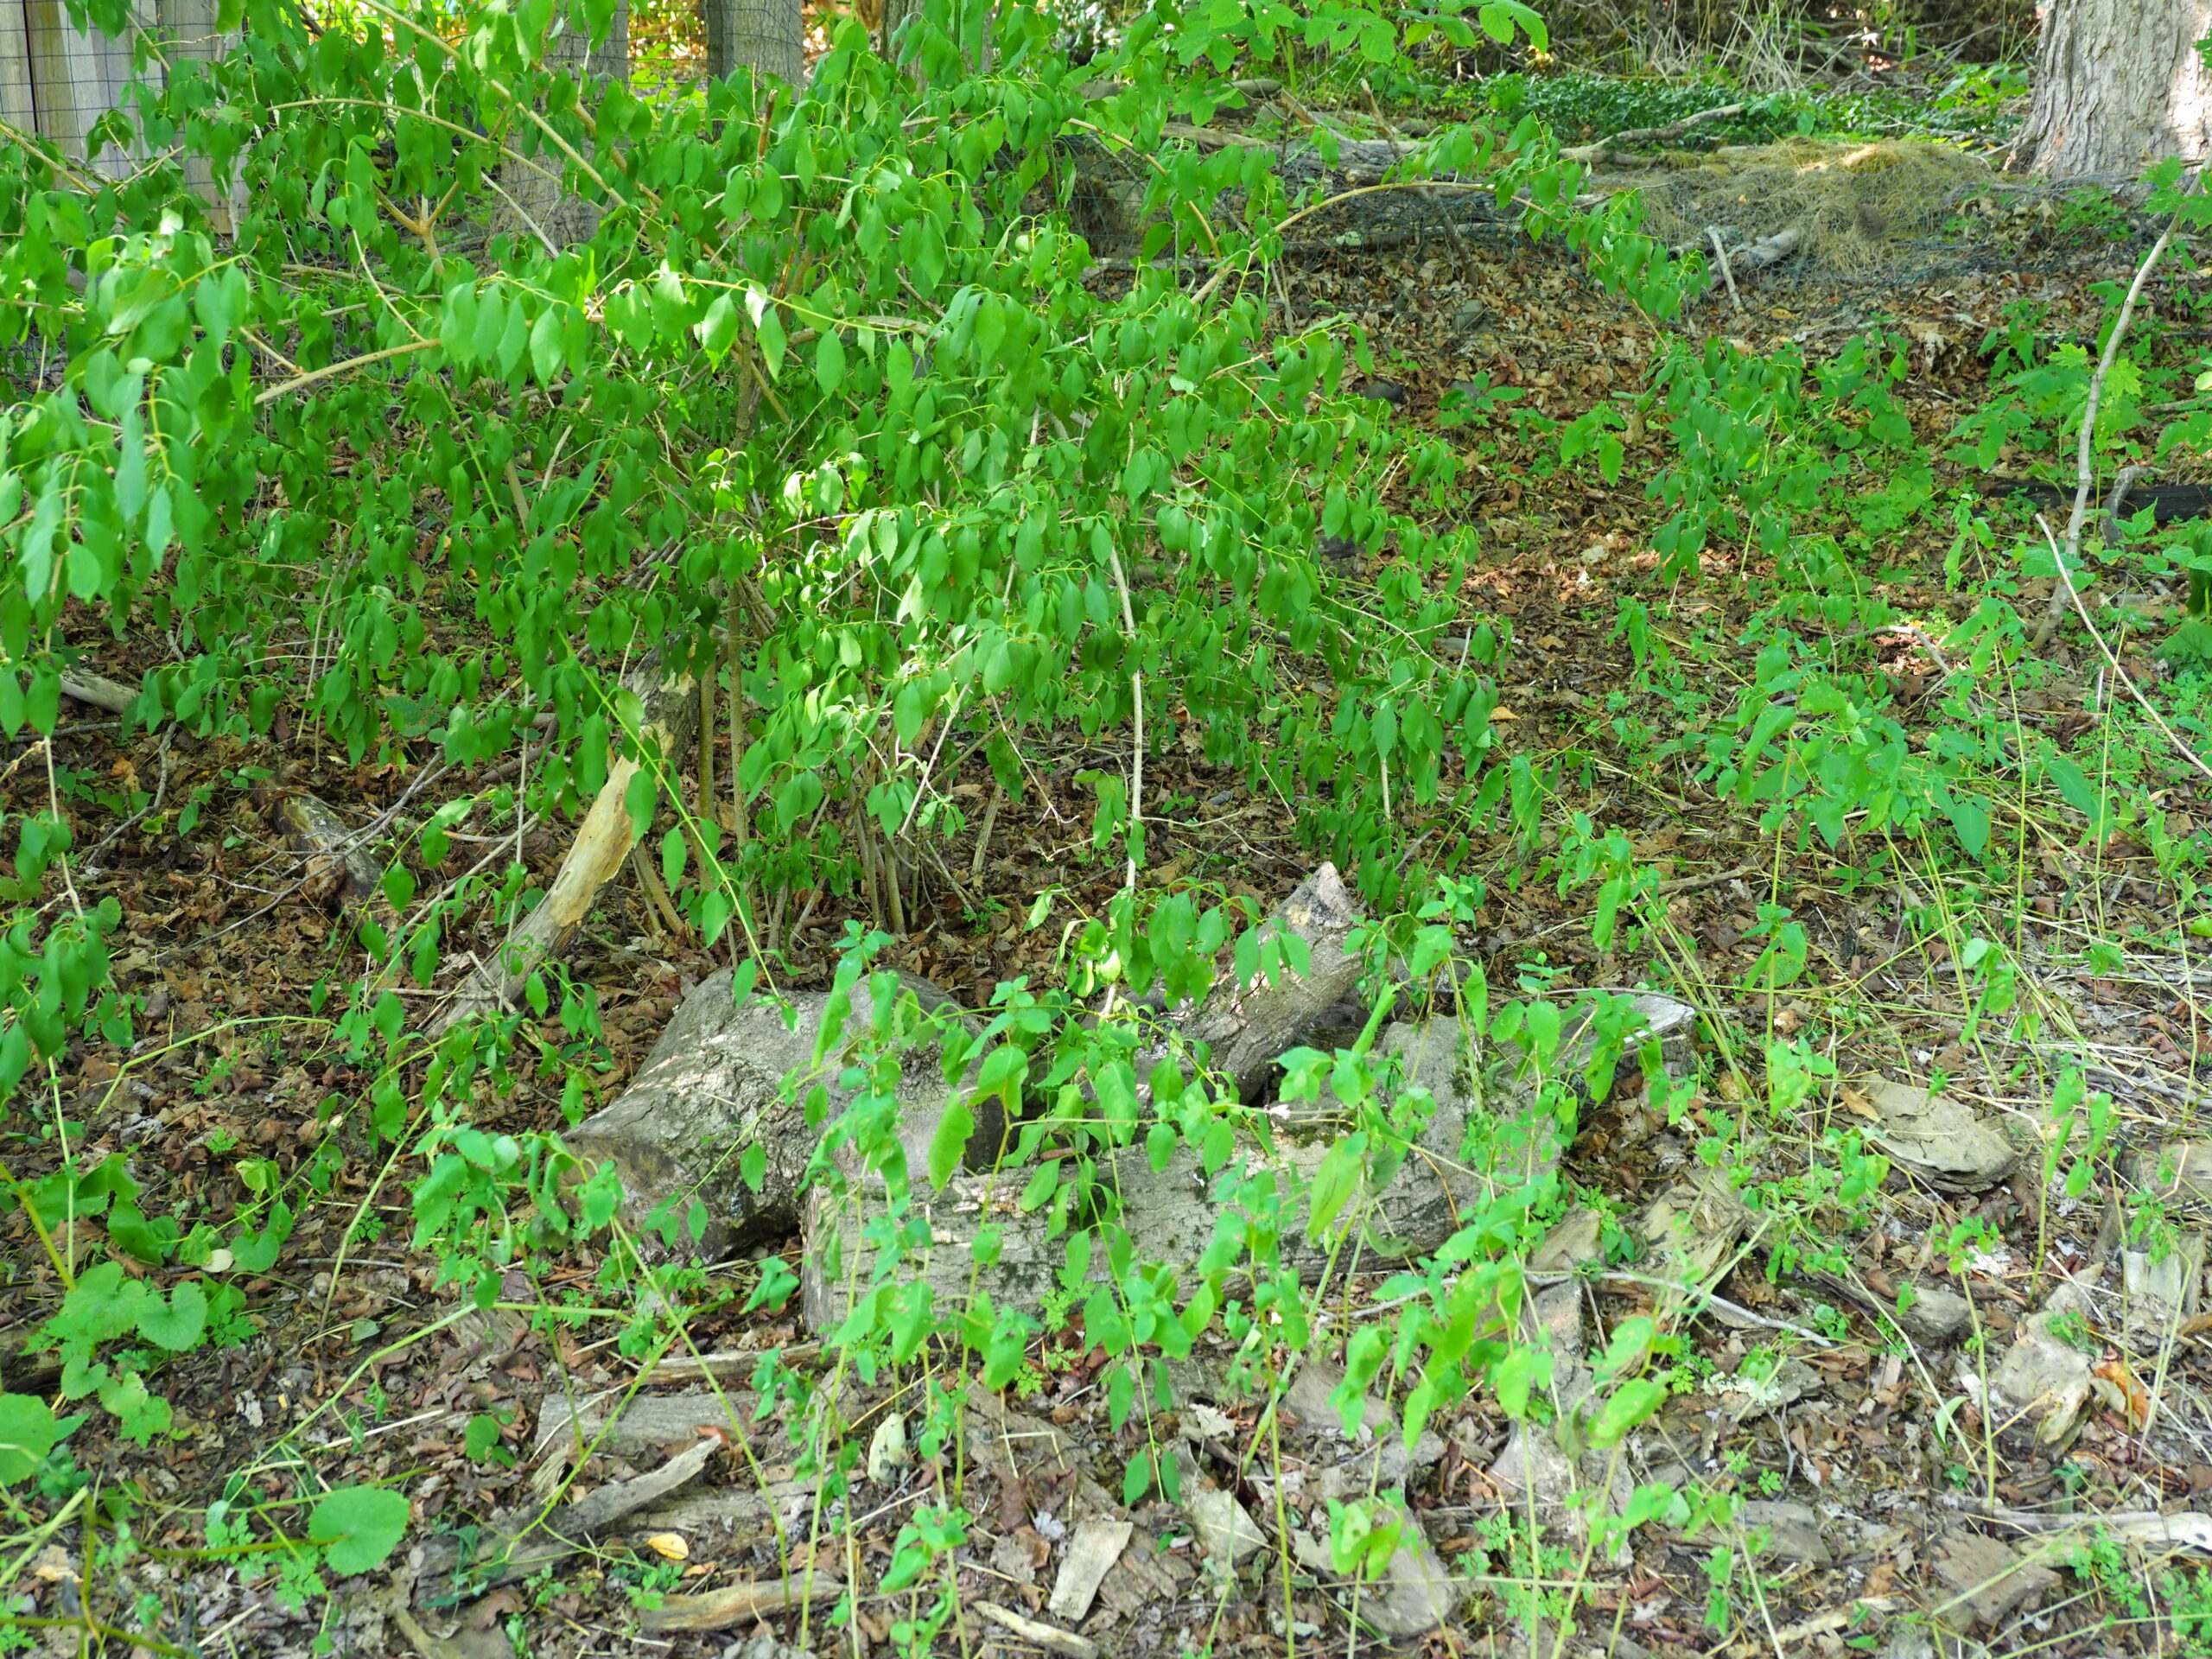 Another plant, a Japanese wood fern, in a shaded and mulched area is showing the signs of stress from the ongoing drought.
ANDREW MESSINGER